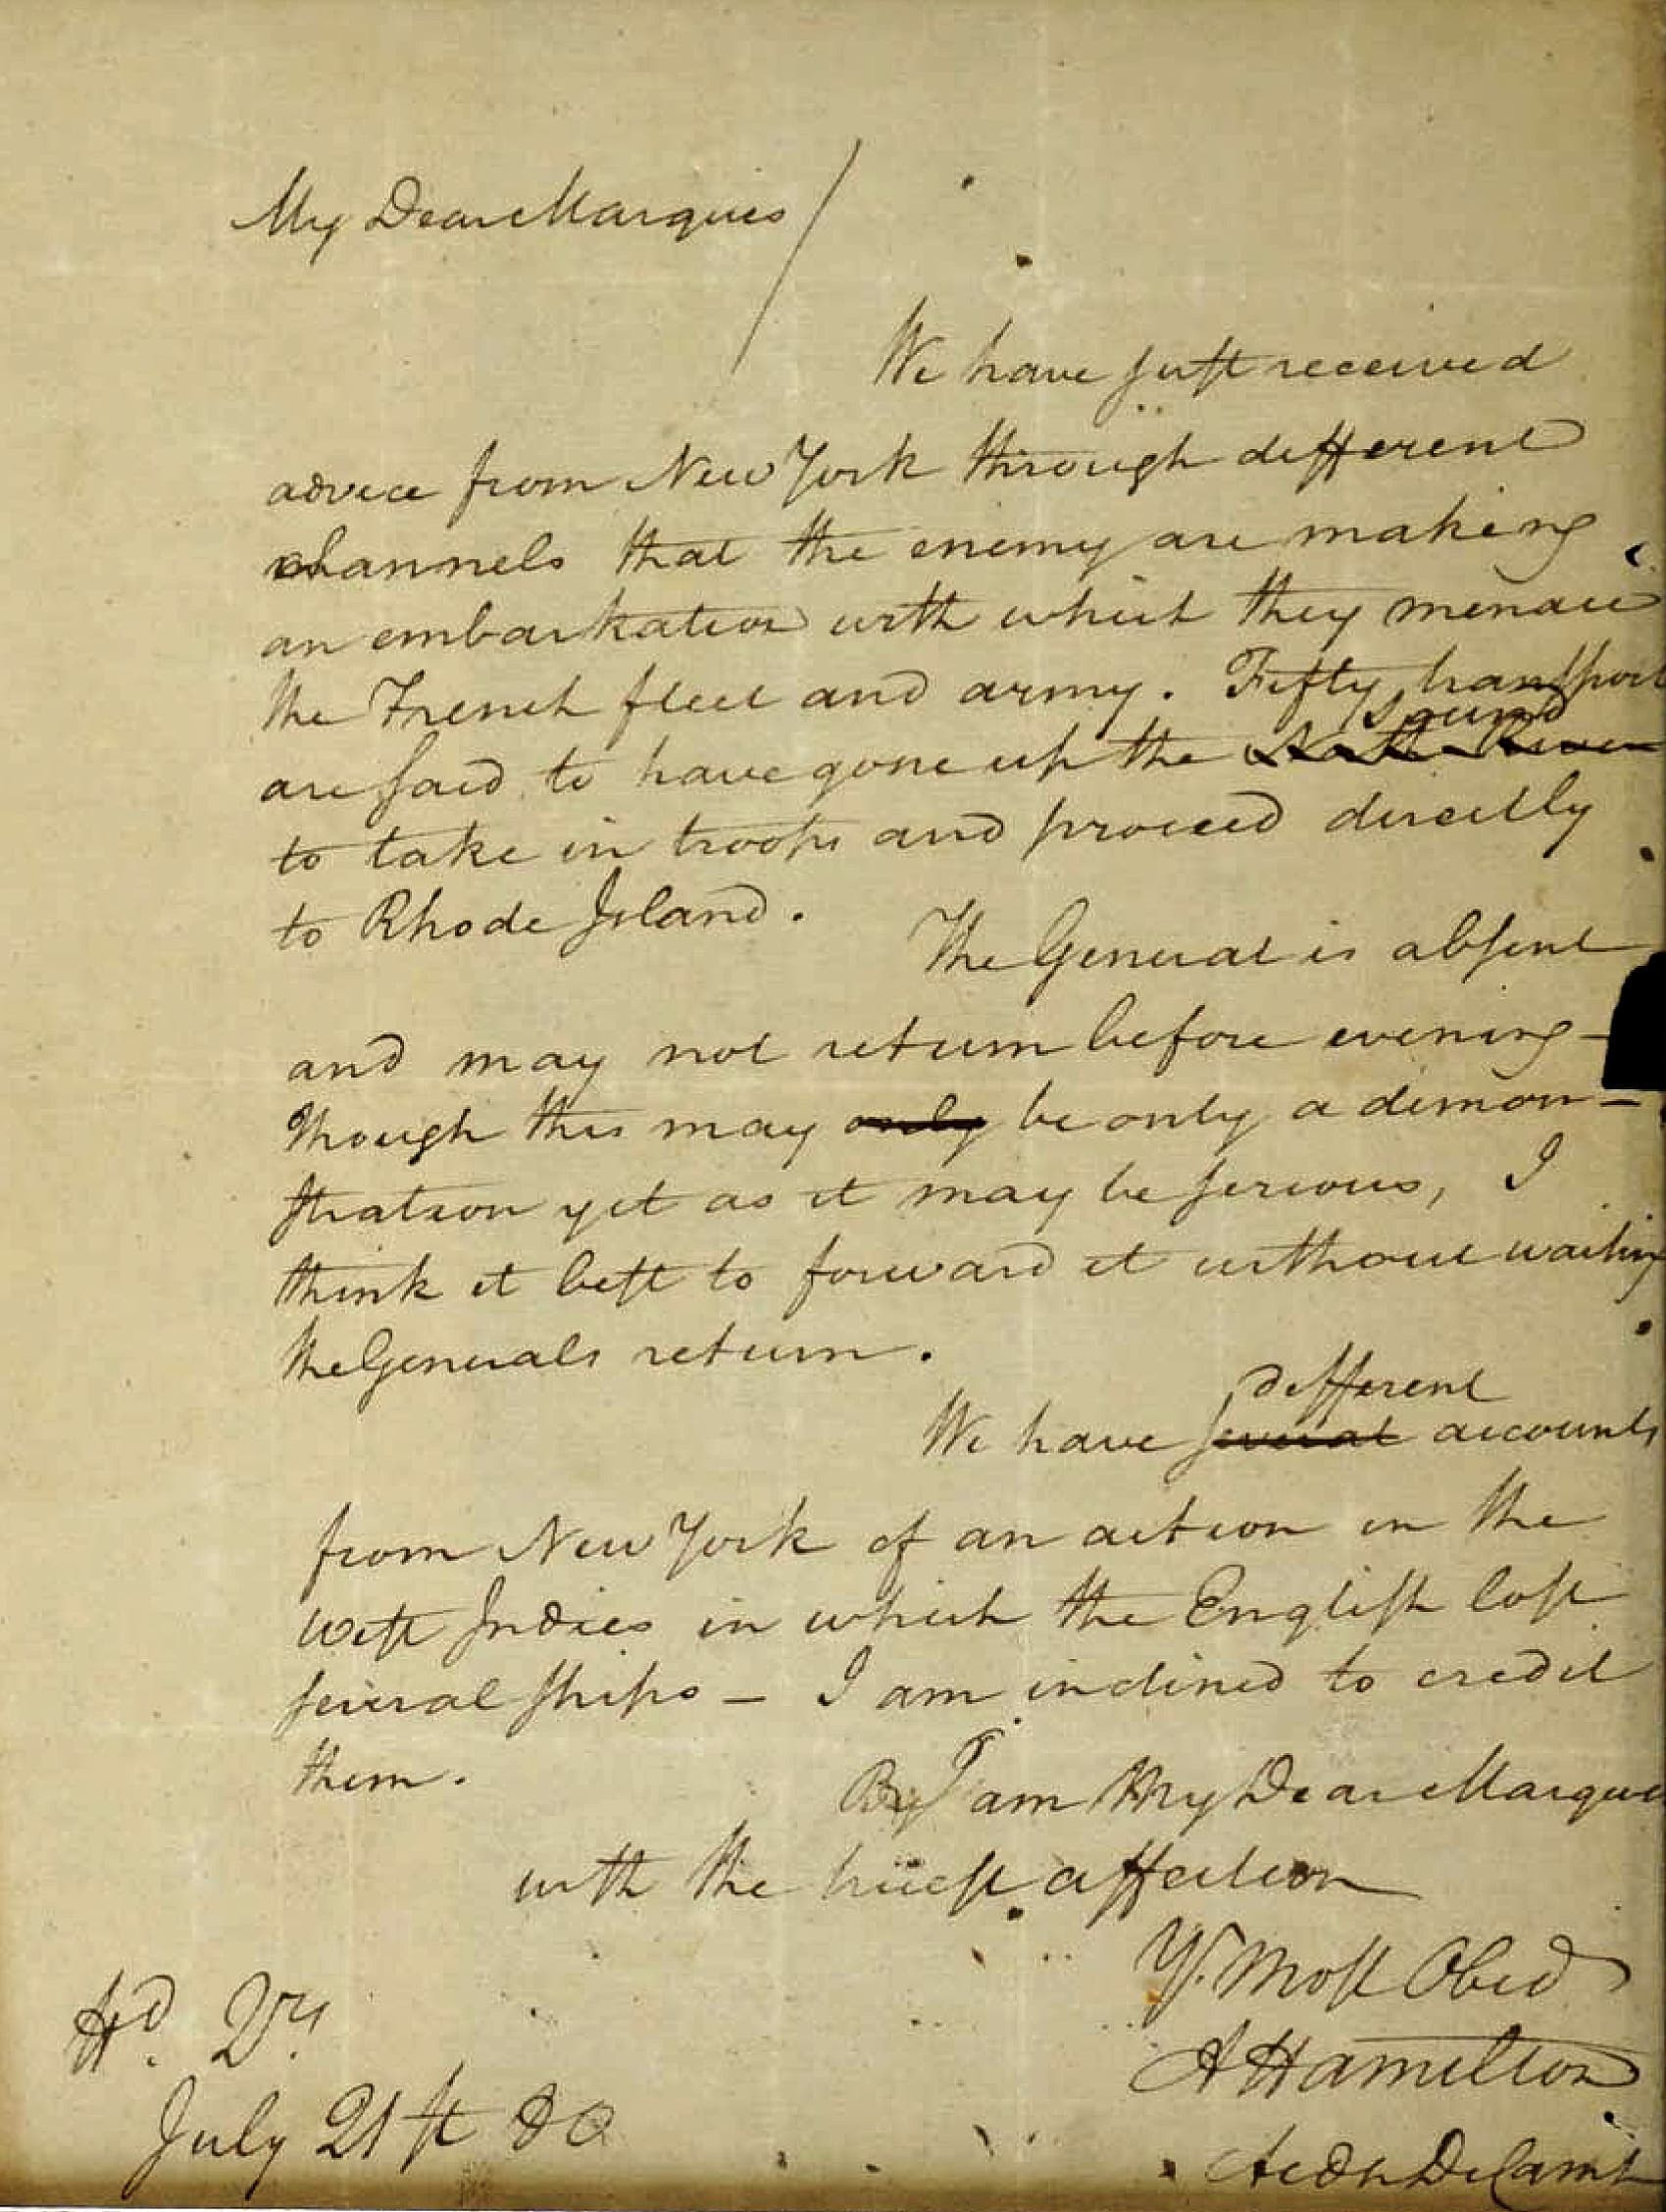 A 1780 letter from Alexander Hamilton to the Marquis de Lafayette was stolen from the Massachusetts Archives decades ago. (U.S. Attorney's Office via AP)